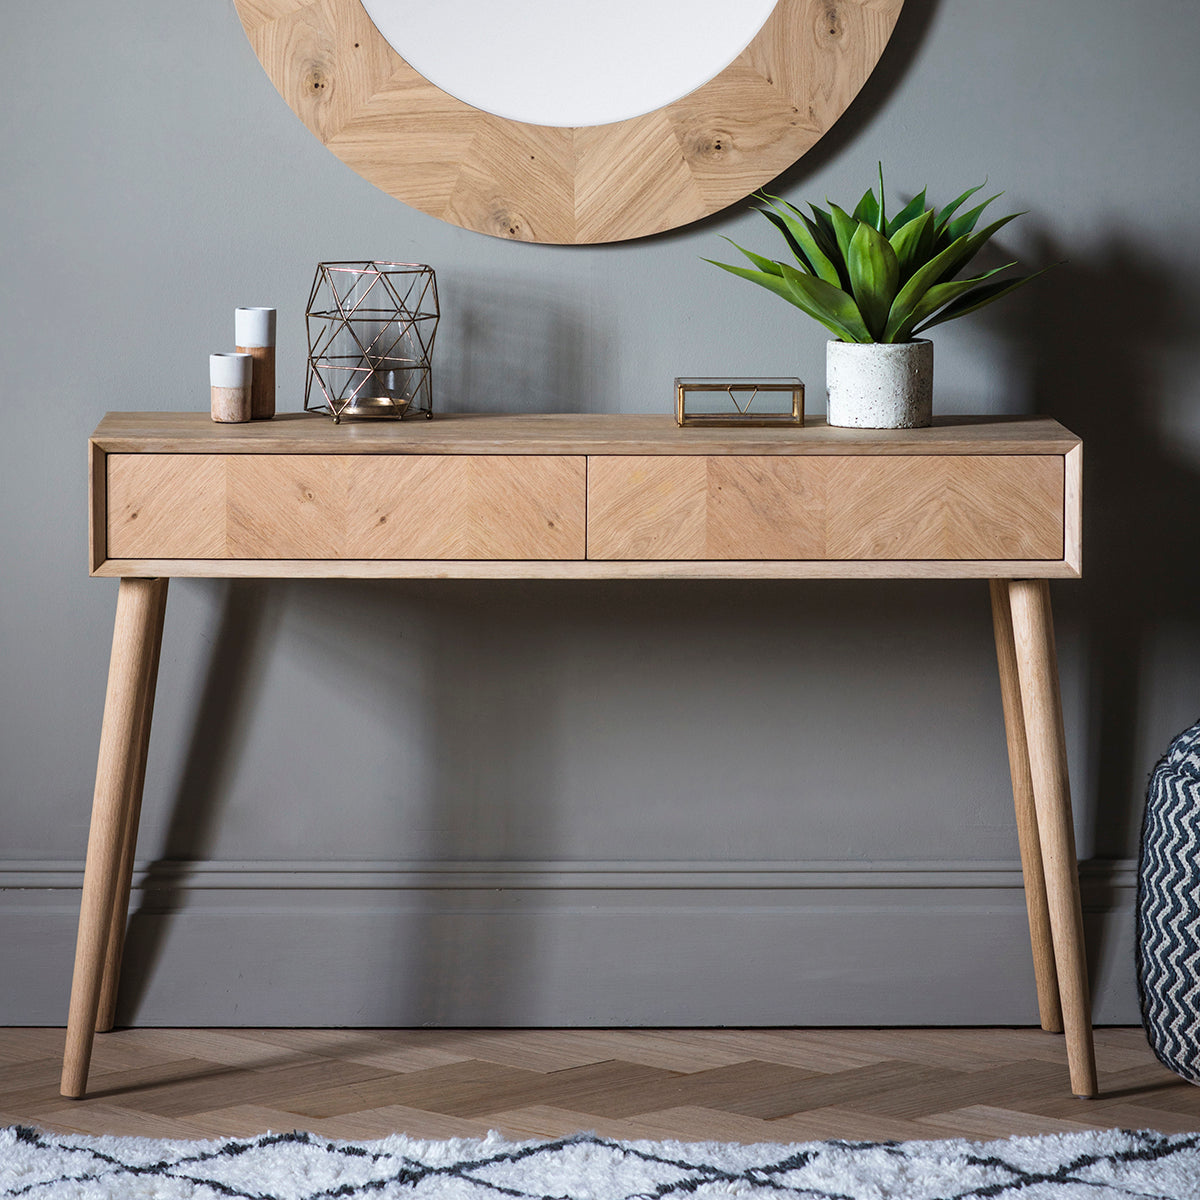 A Tristford 2 Drawer Console Table with mirror for interior decor and home furniture.